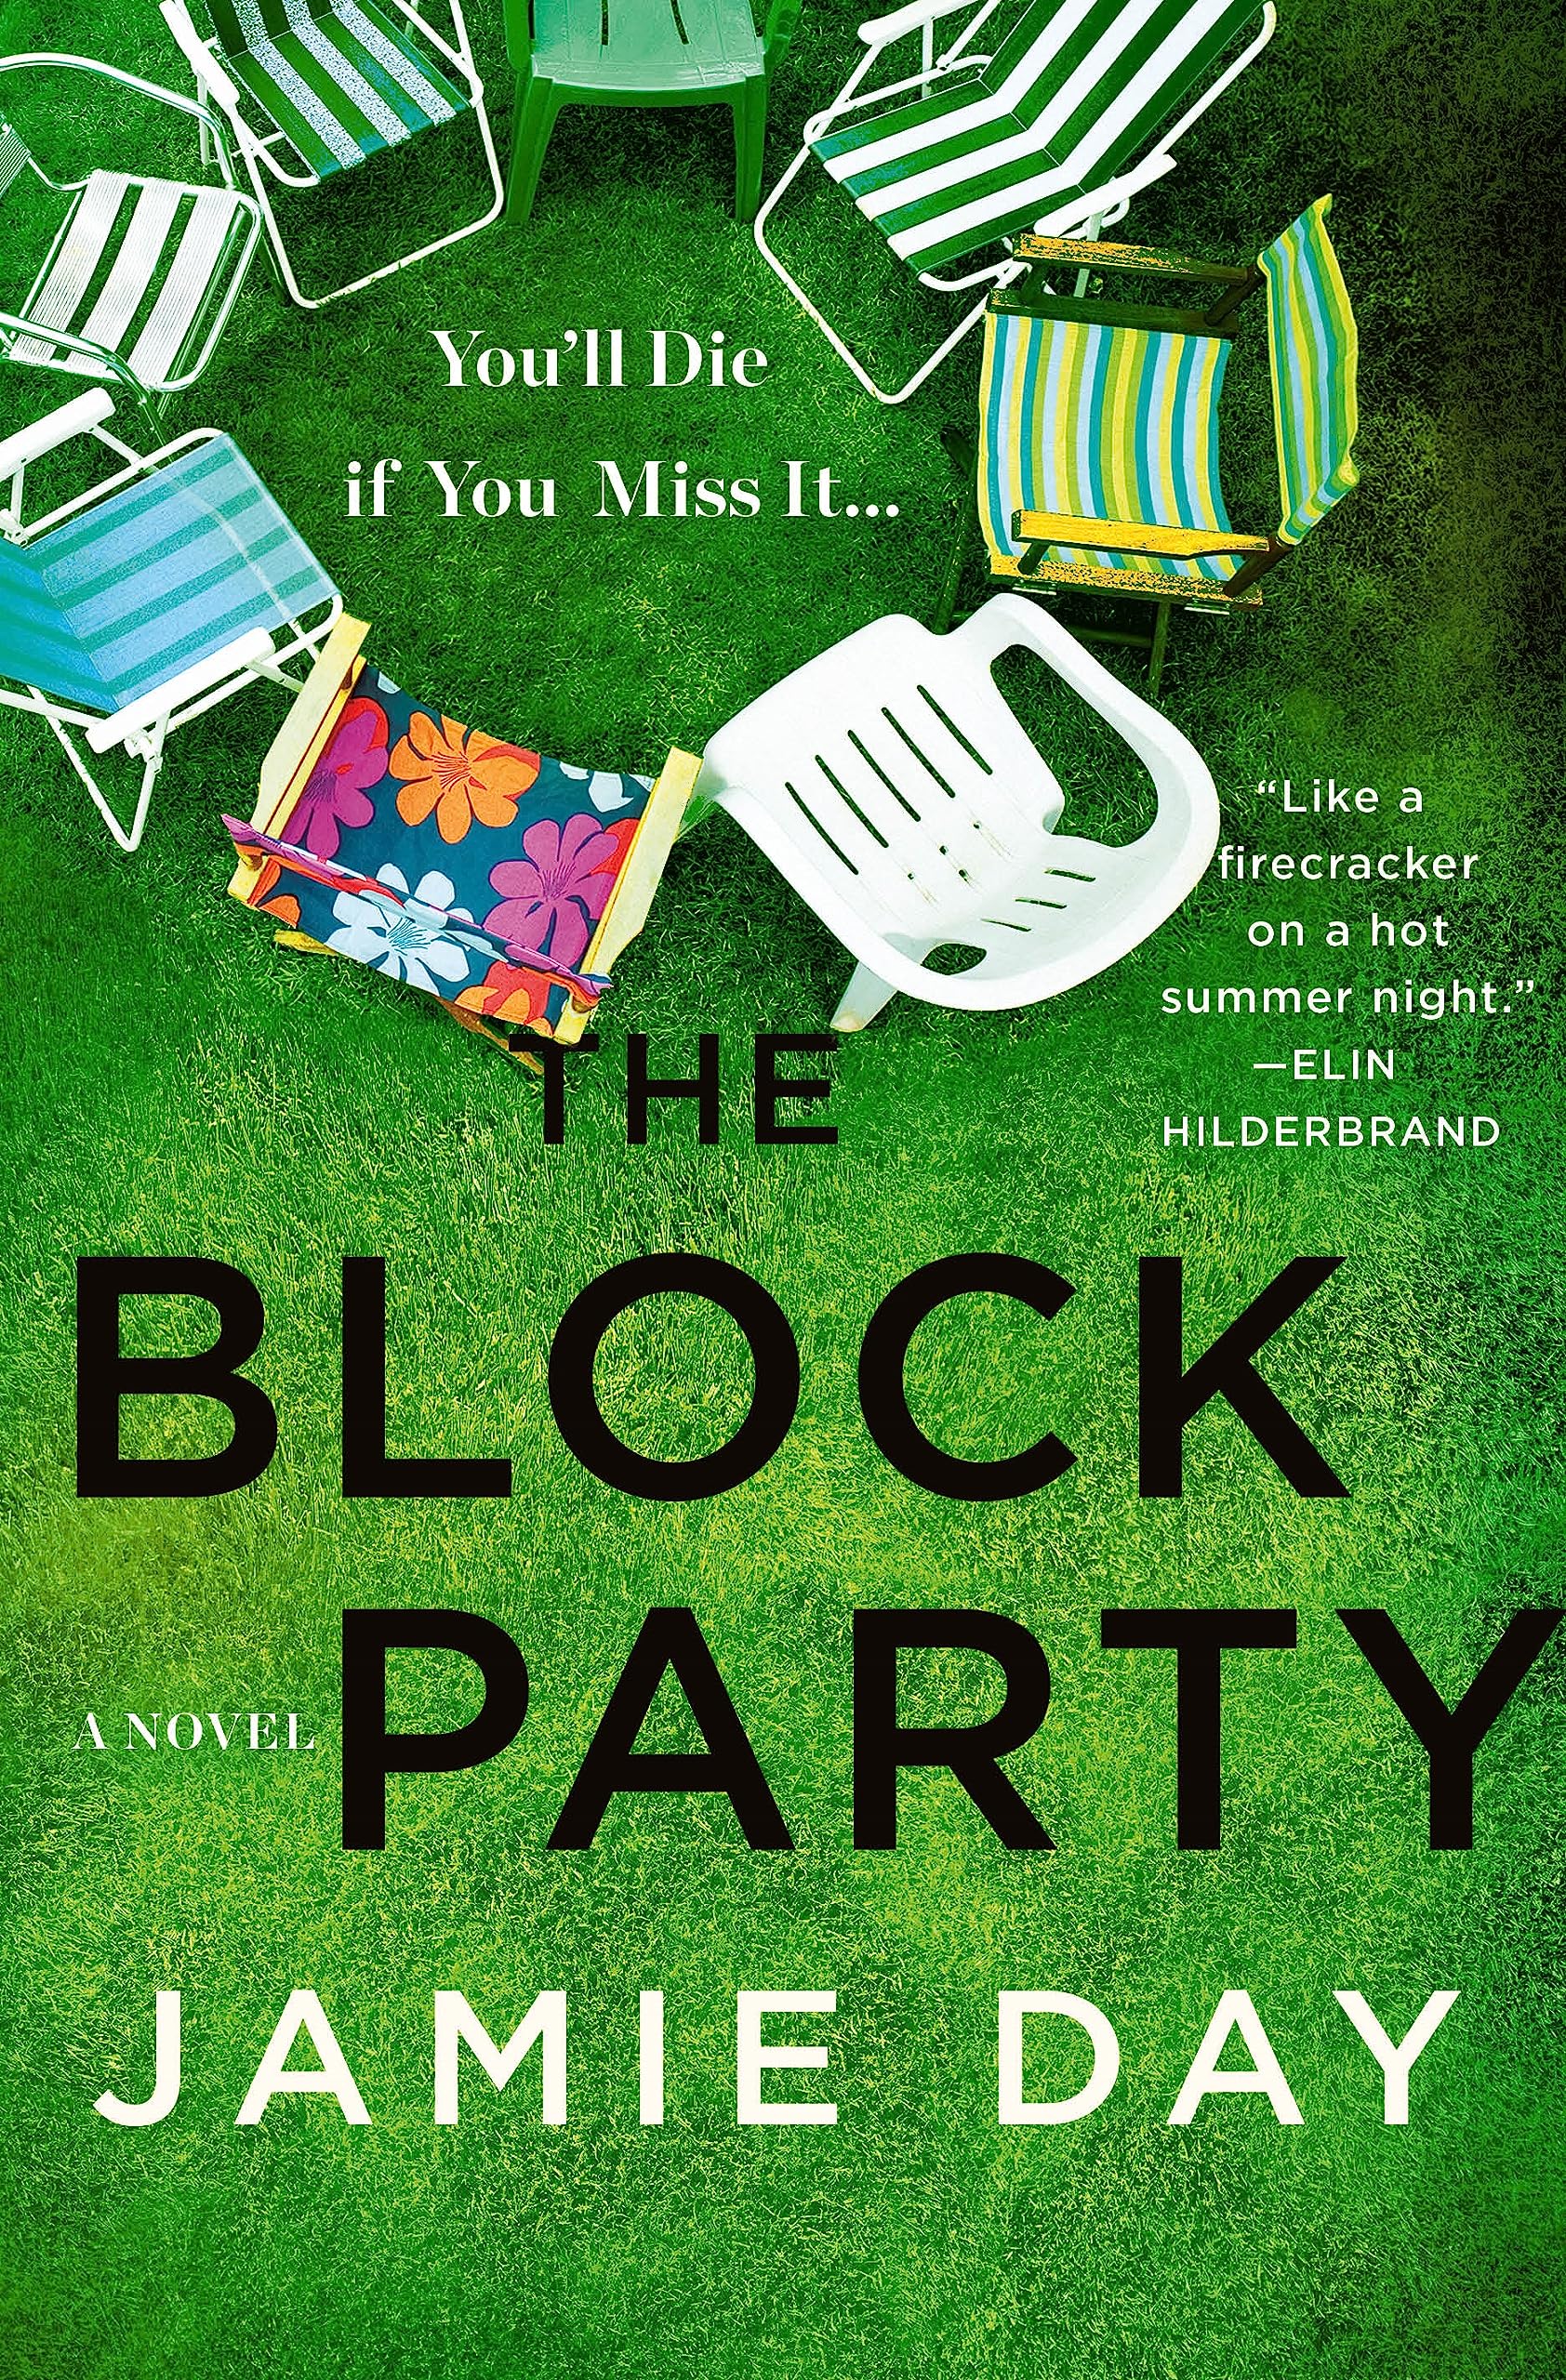 Image for "The Block Party"